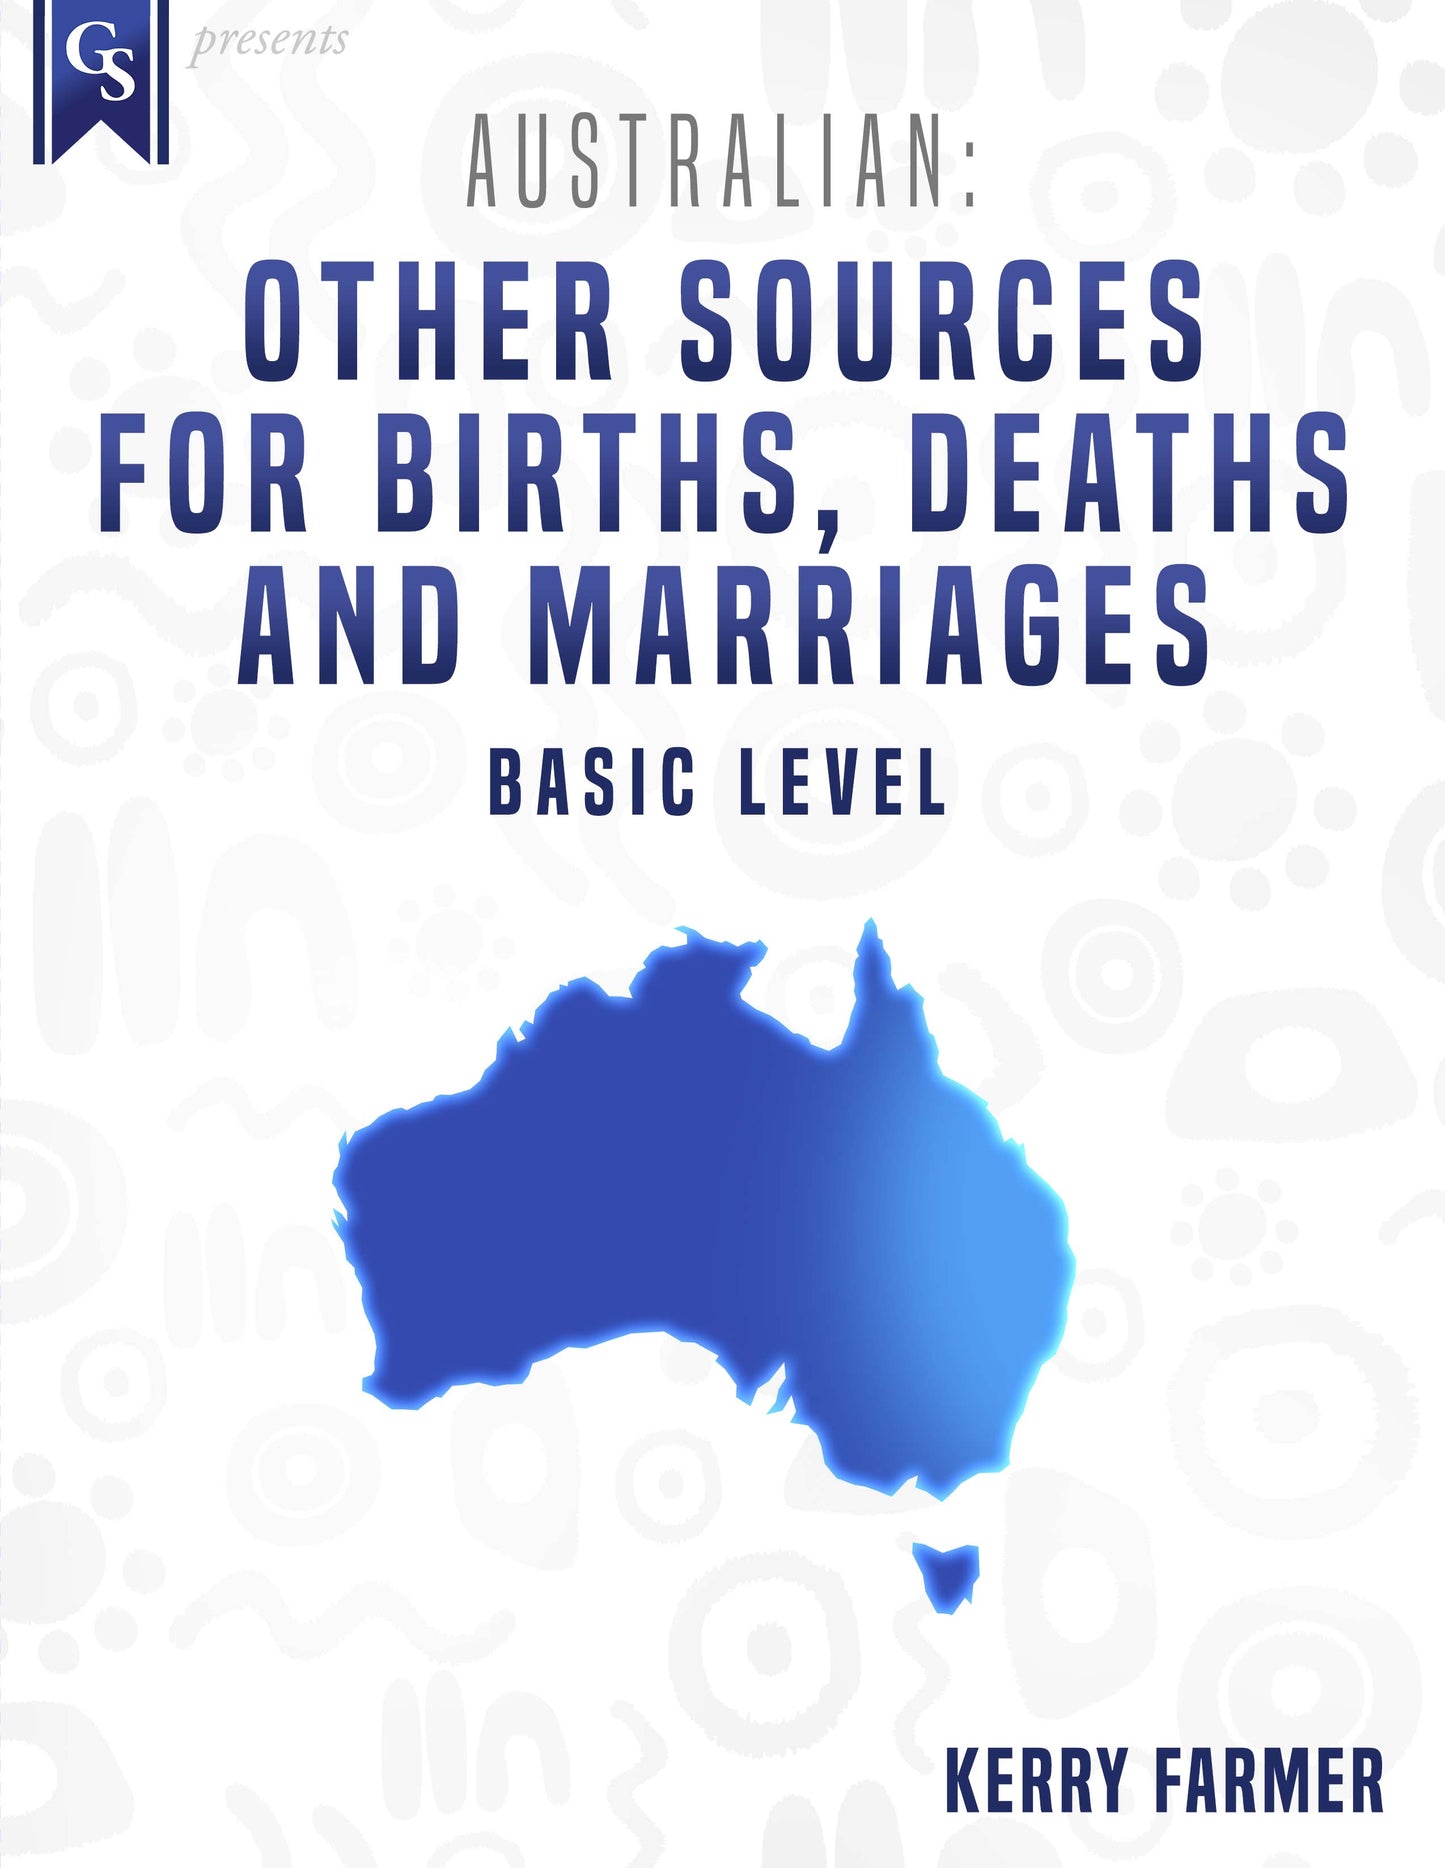 Printed Course Material-Australian: Other Sources for Births, Deaths & Marriages